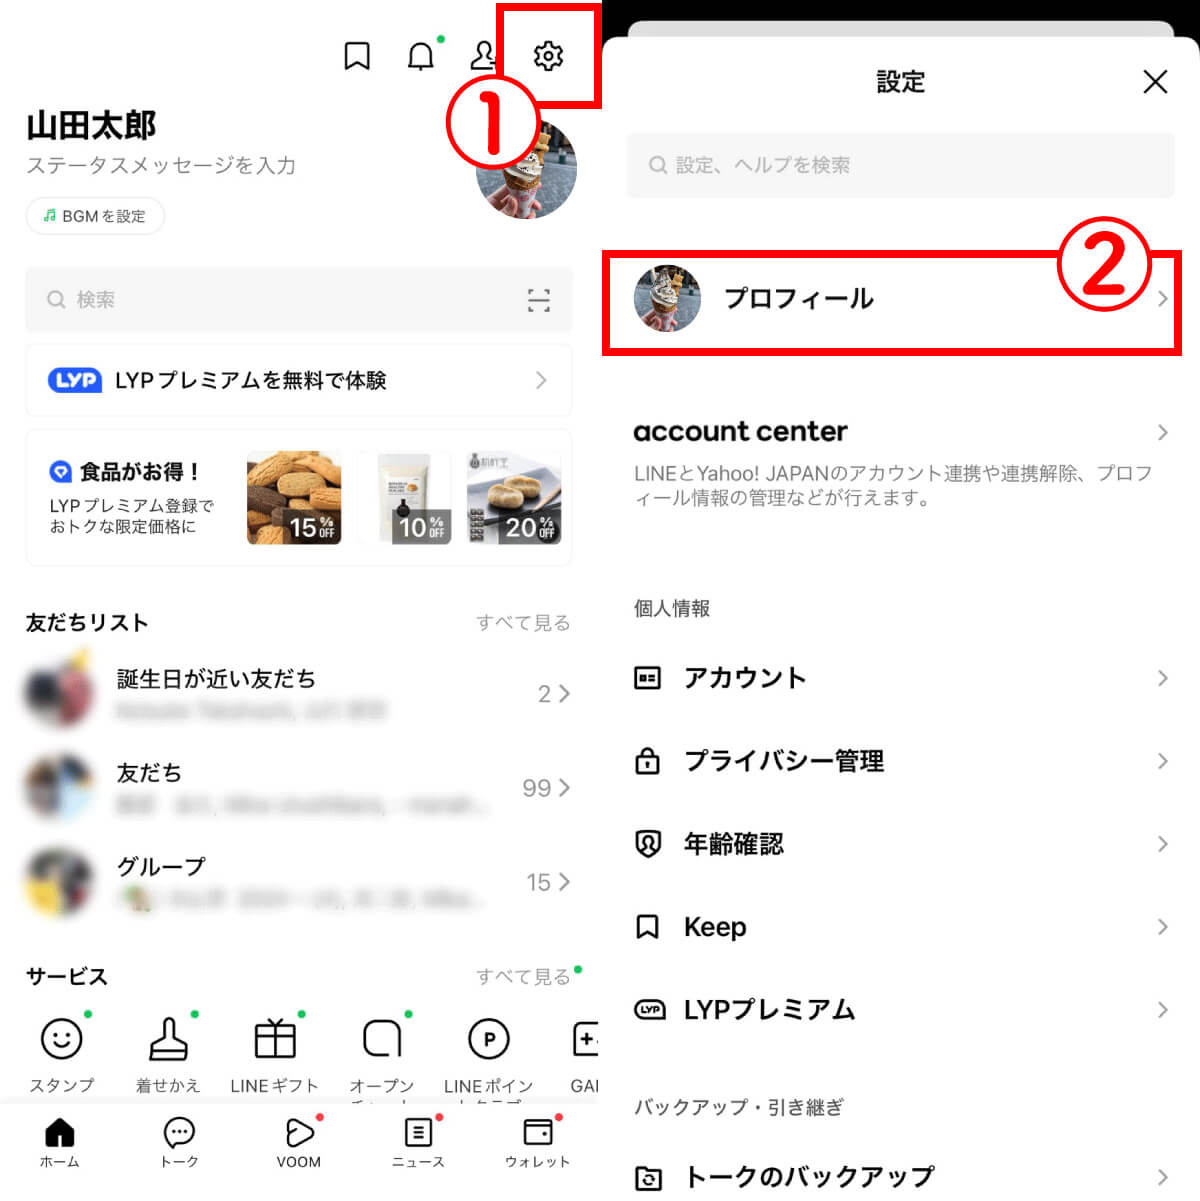 【iPhone/Android】LINEの名前のフォントを筆記体にする方法1